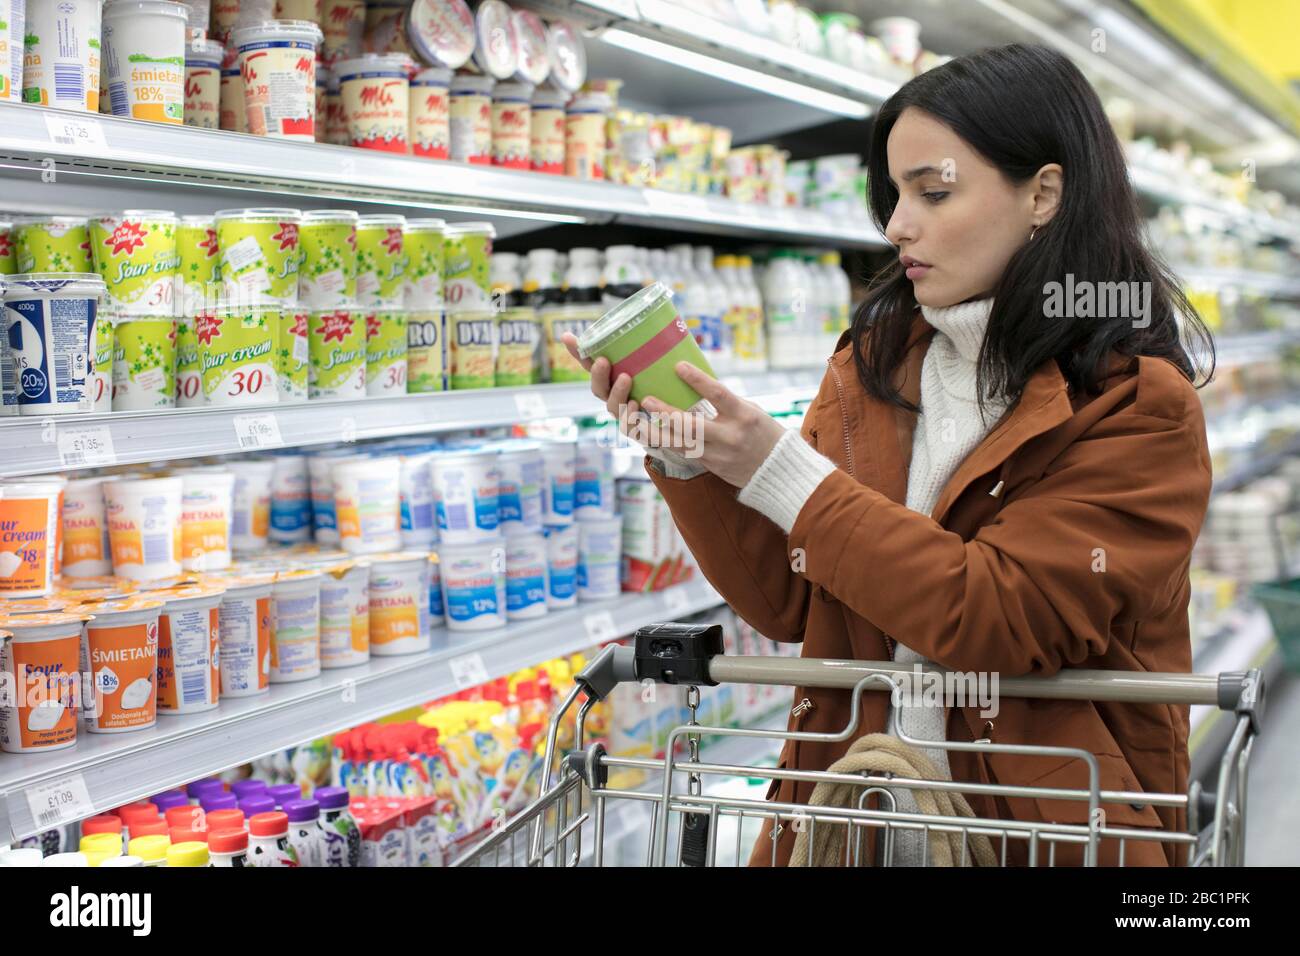 Young woman reading label on container in supermarket Stock Photo